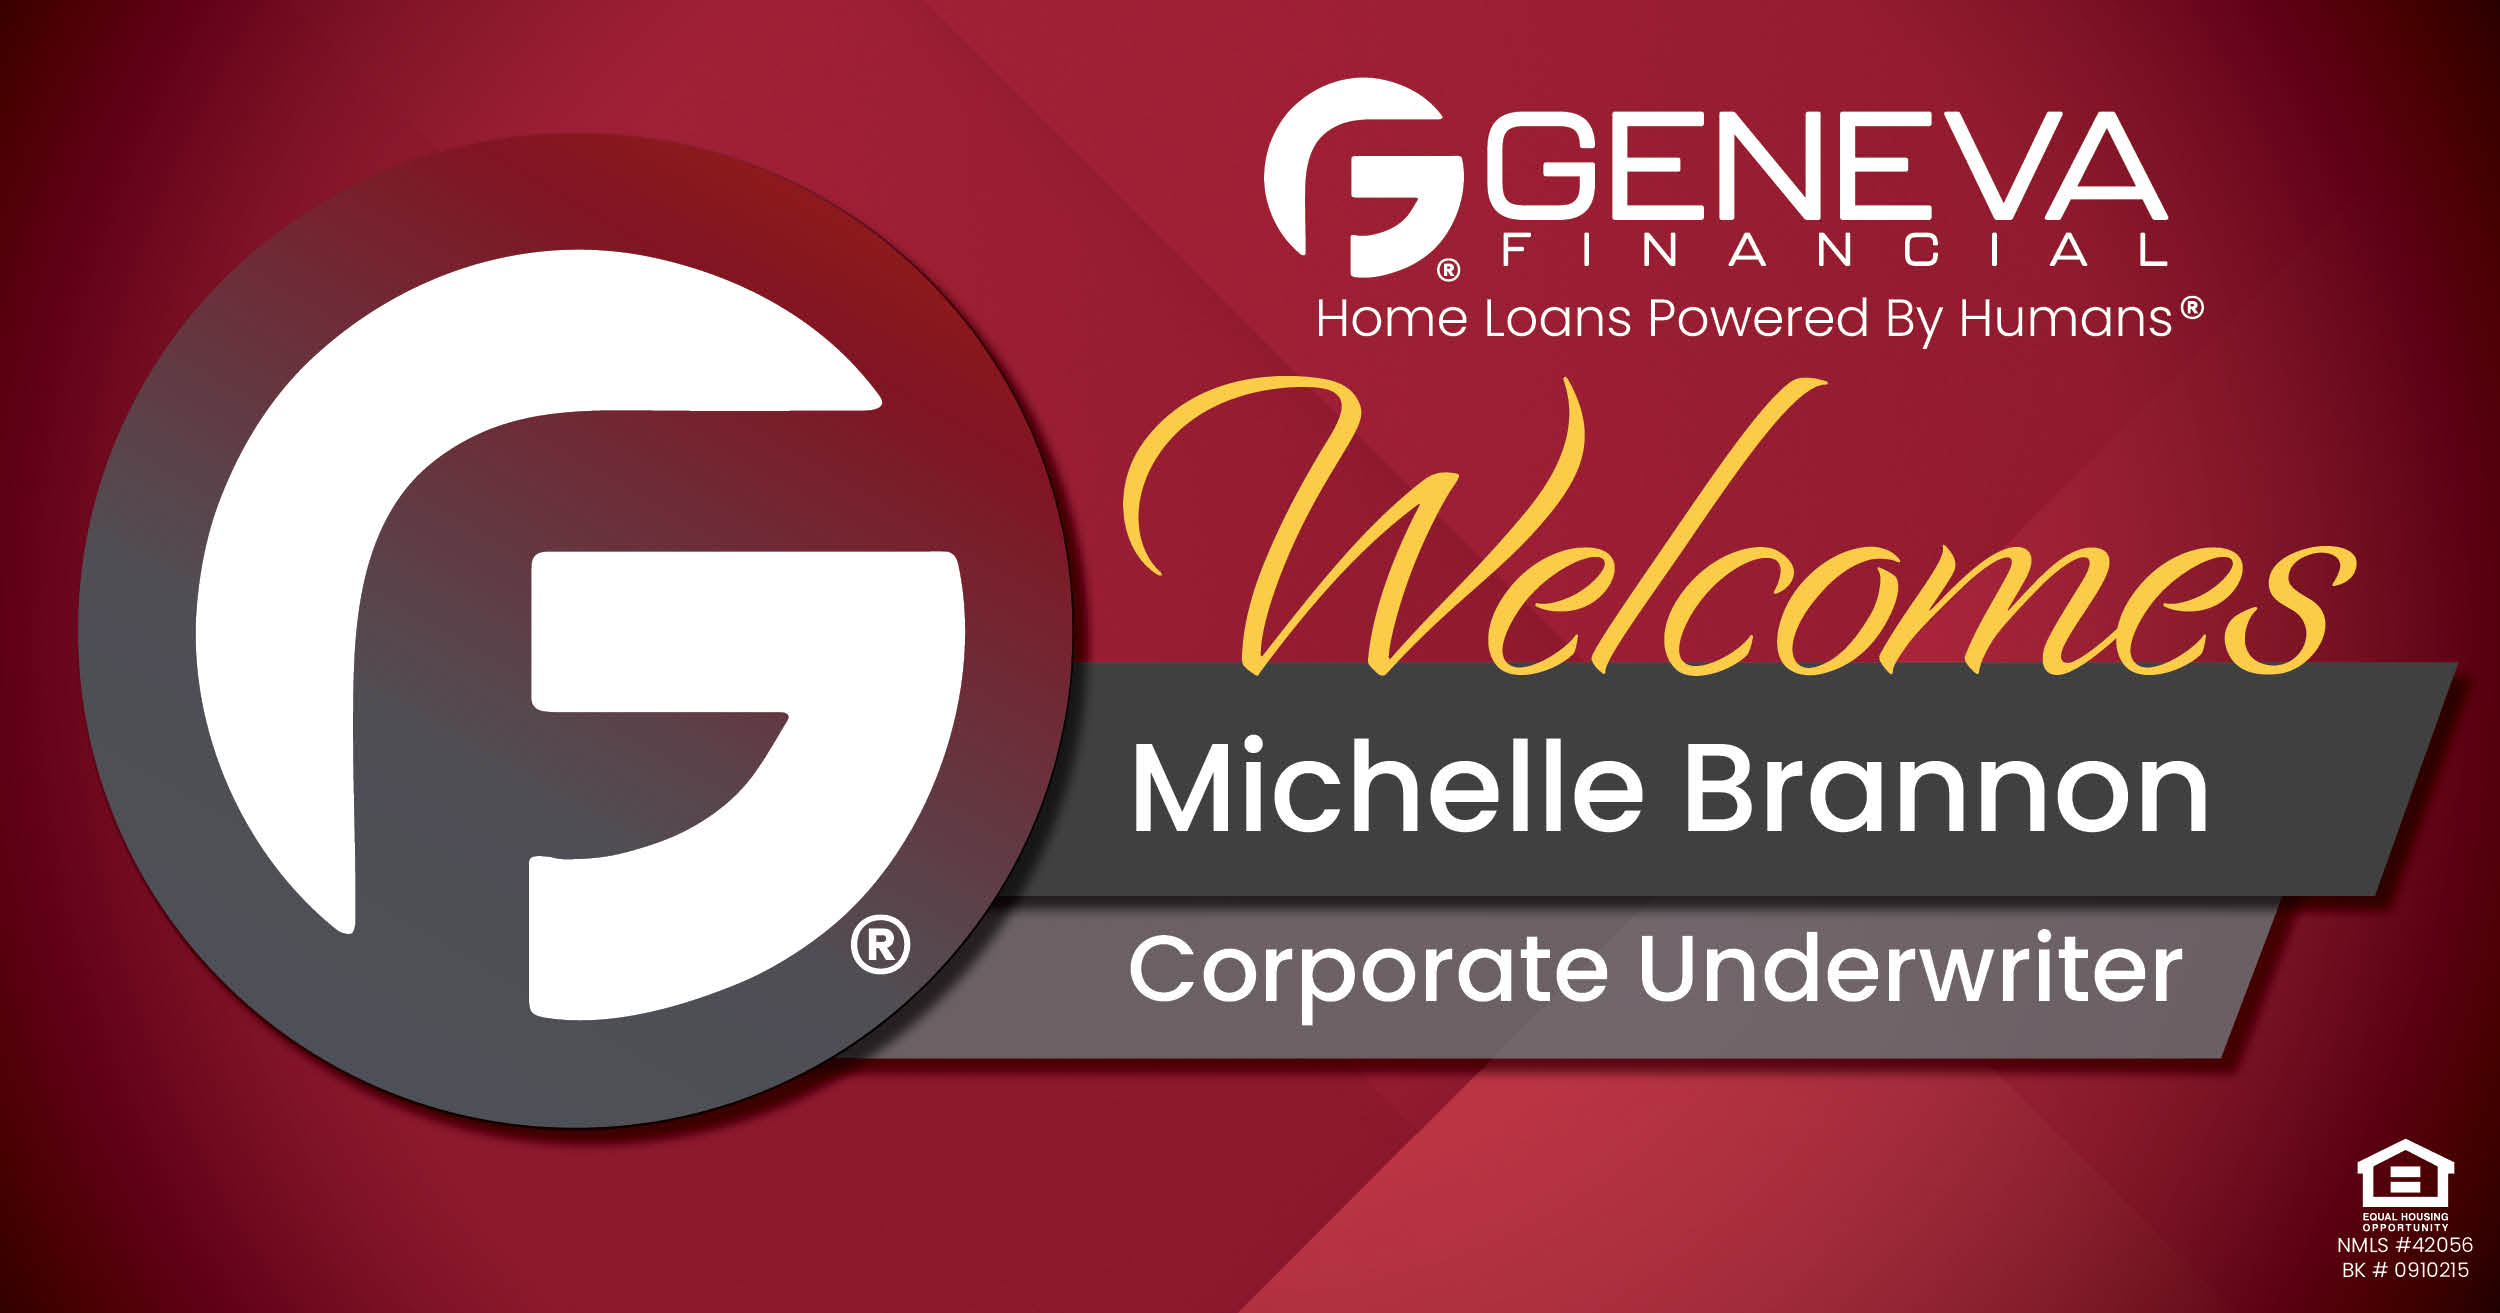 Geneva Financial Welcomes New Underwriter Michelle Brannon to Geneva Corporate – Home Loans Powered by Humans®.